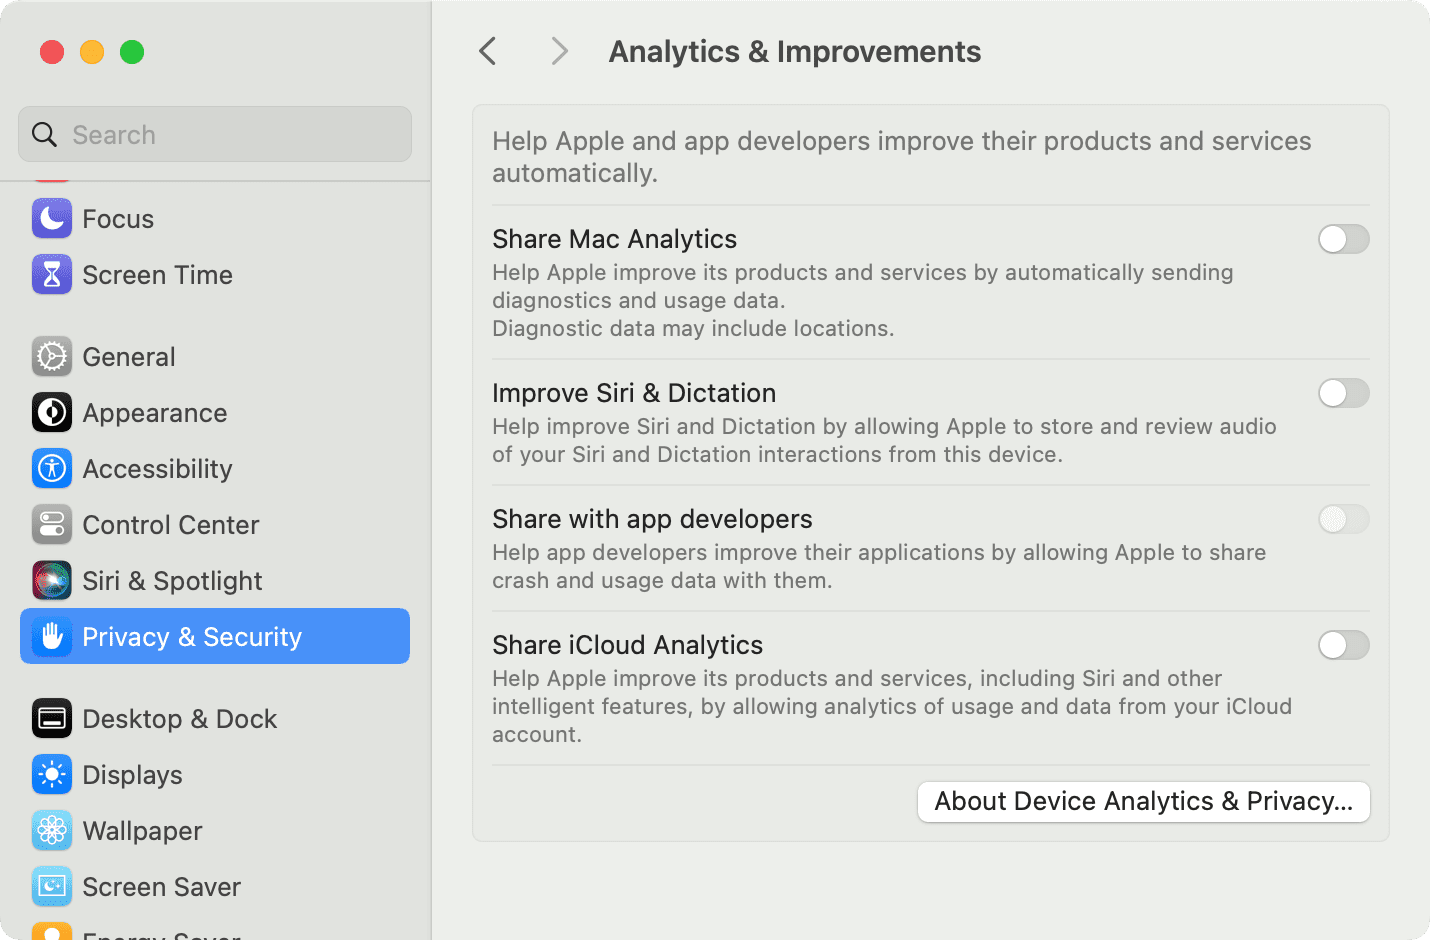 Turn off Share iCloud Analytics in Mac System Settings